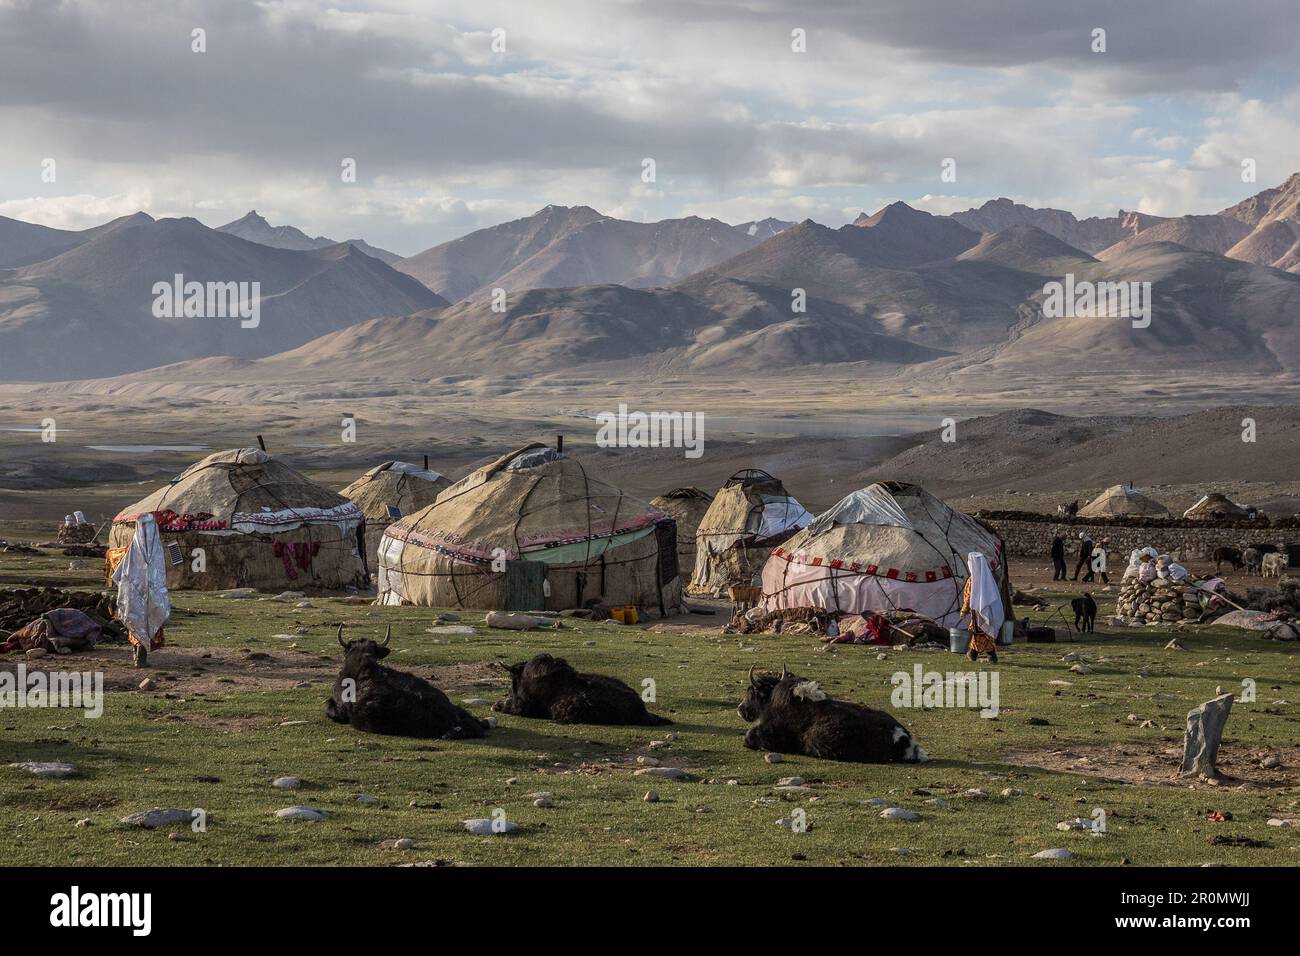 Kyrgyz yurt settlements with yaks in Pamir Mountains, Moqur, Afghanistan Stock Photo